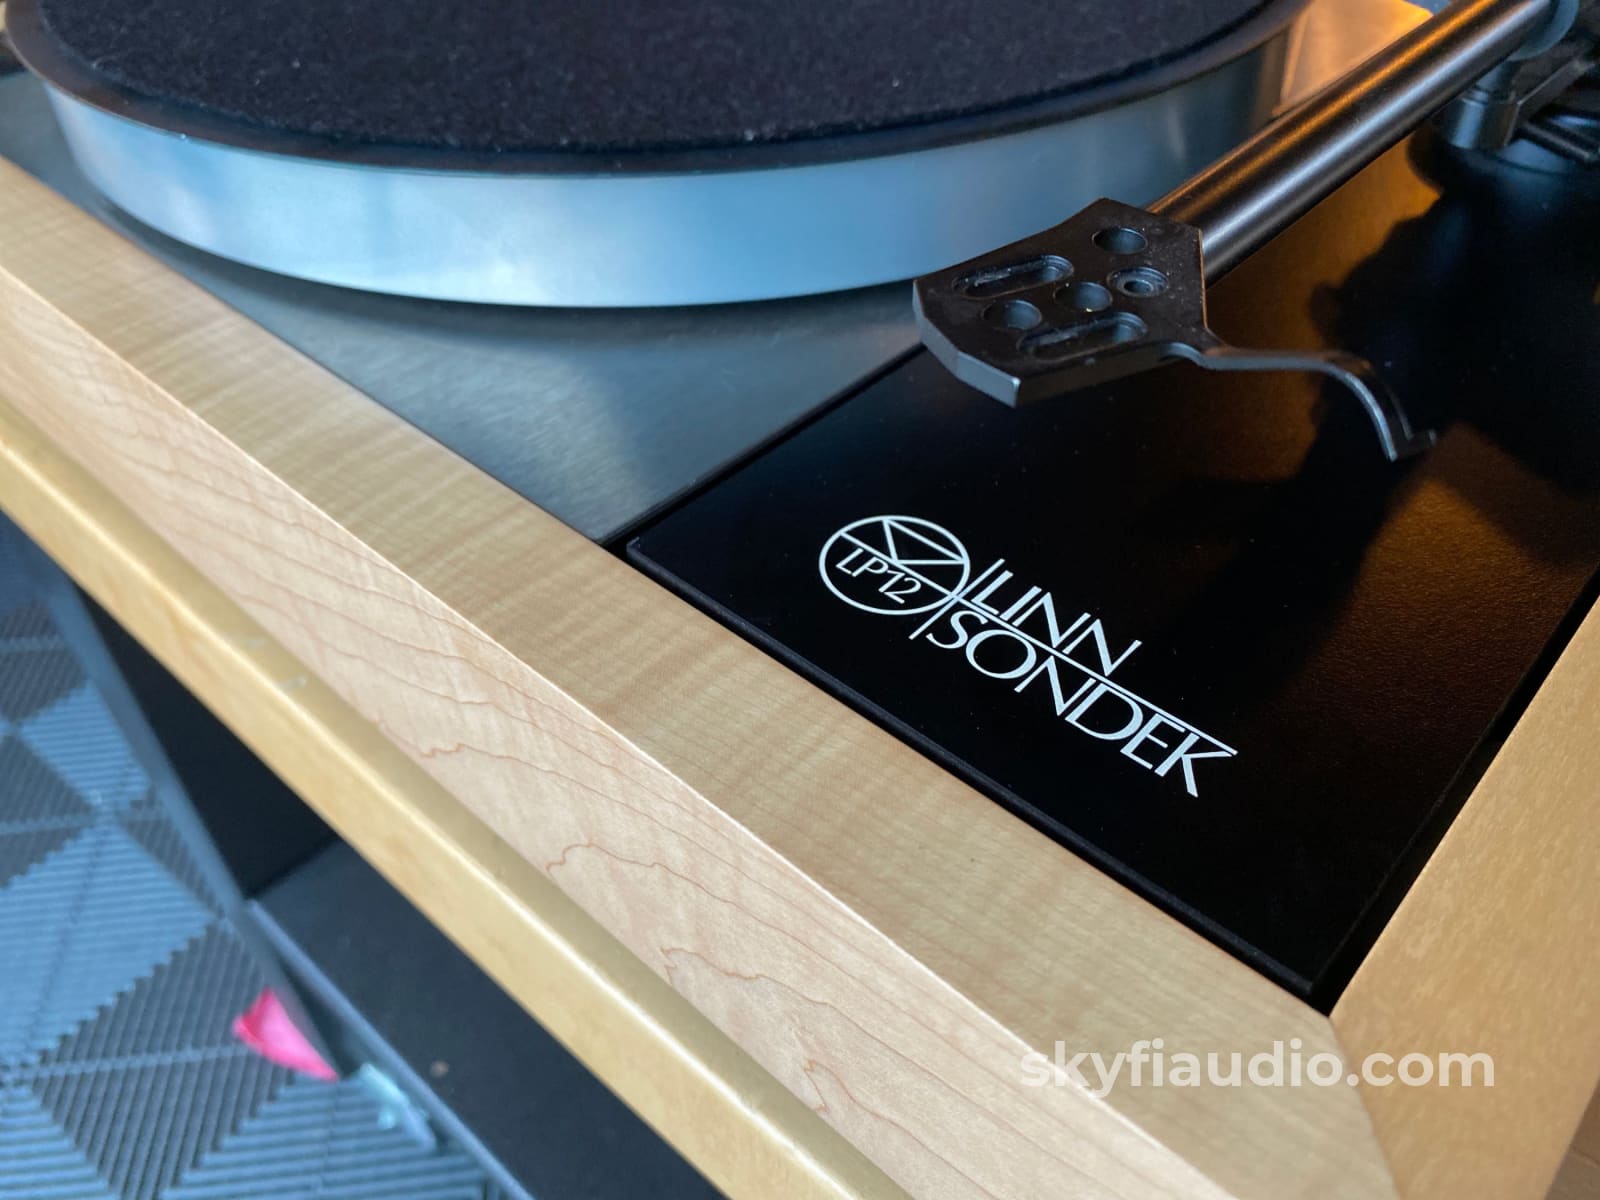 Linn Lp12 Turntable - Loaded And Upgraded With The Best Lingo Ekos Starling More.